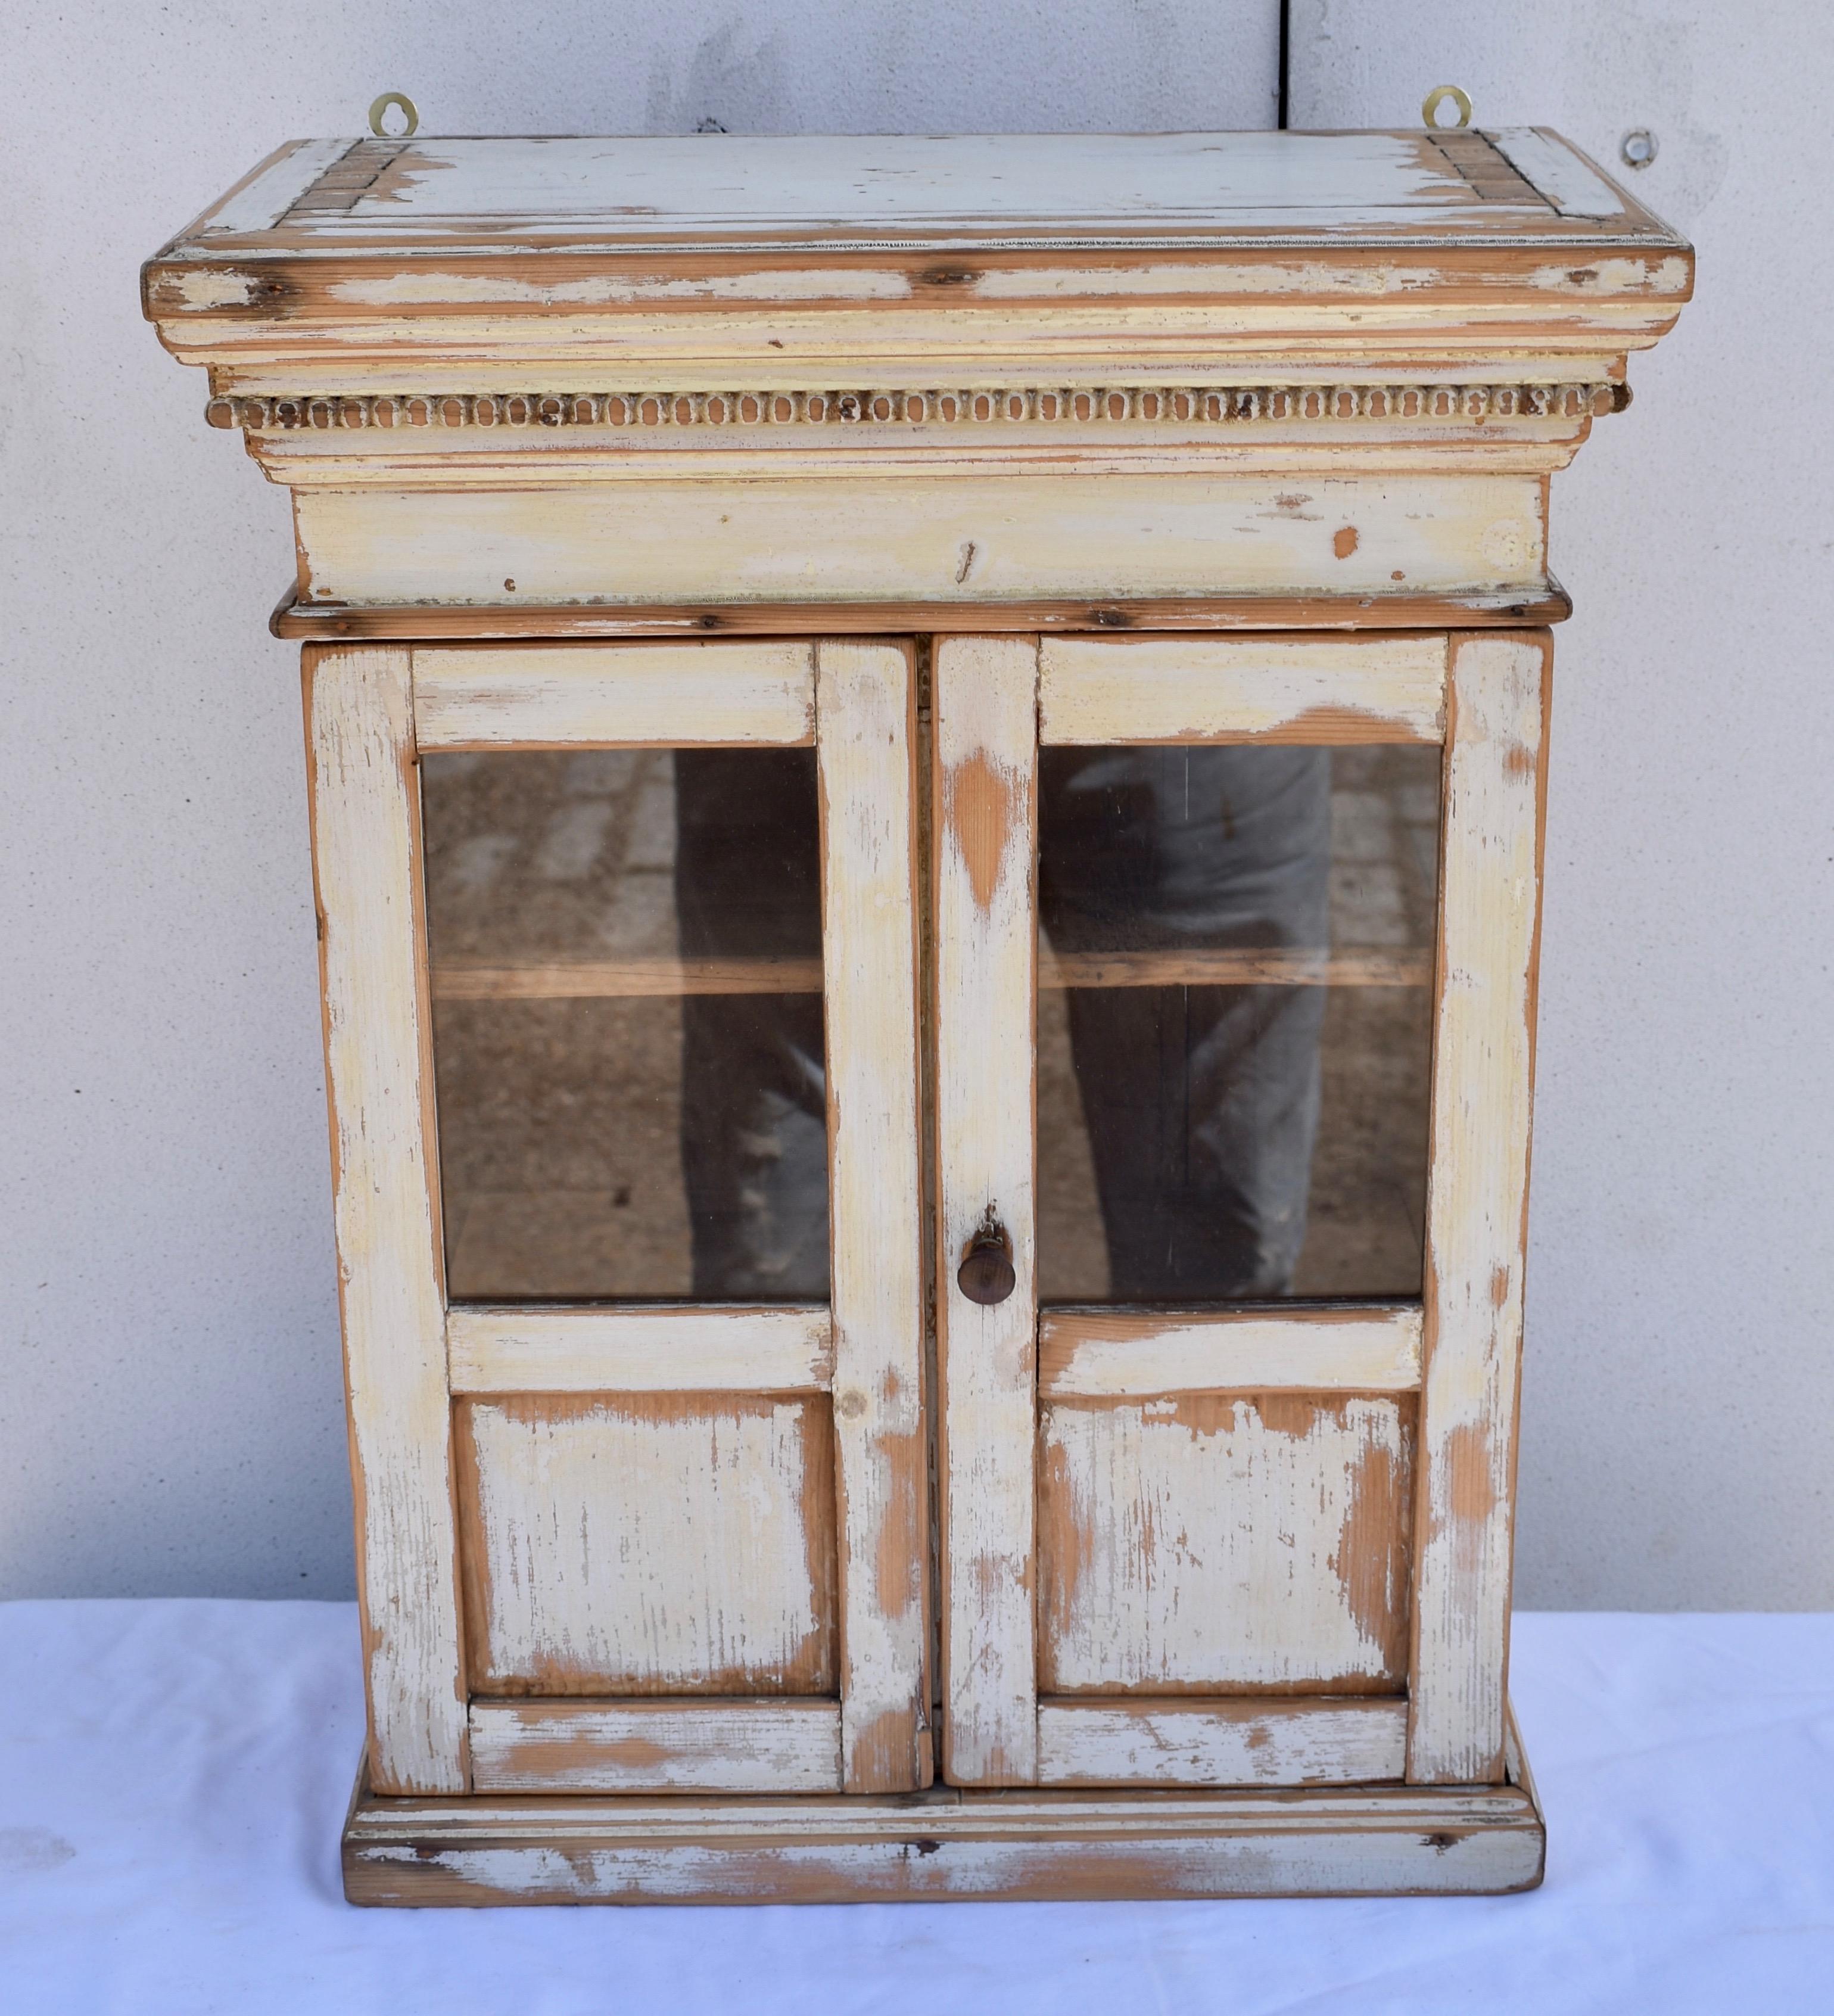 This little piece is so beautifully made that it is more a miniature armoire than a hanging cupboard. Beneath a bold crown is a tier of finely carved egg and dart molding above a plain frieze. The two doors, made with through-tenons, are half-glazed